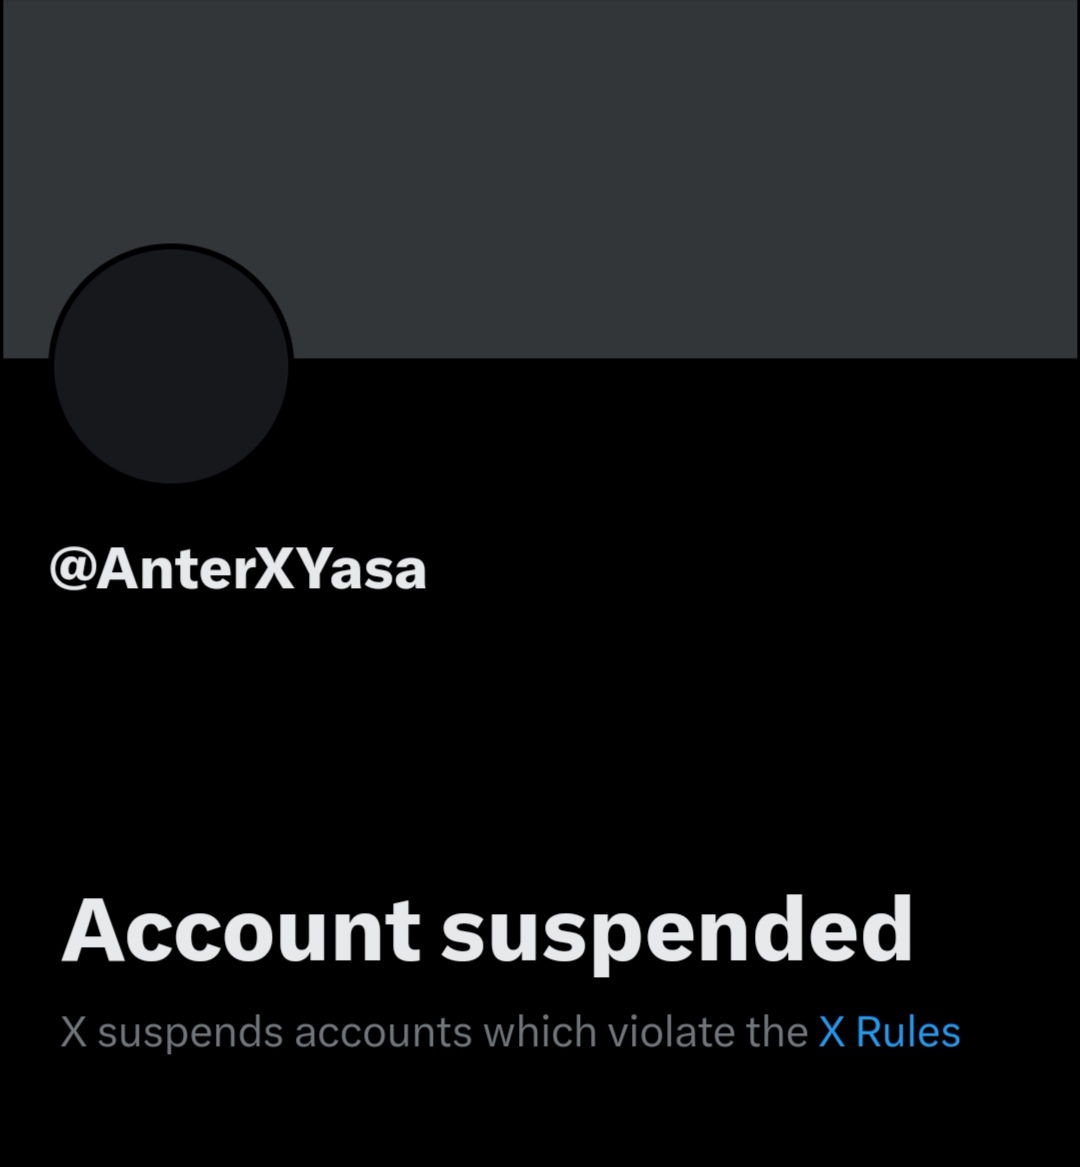 Another ex muslim handle cancelled by the Islamists and the wokes. @AnterXYasa is an exmuslim activist from Finland.